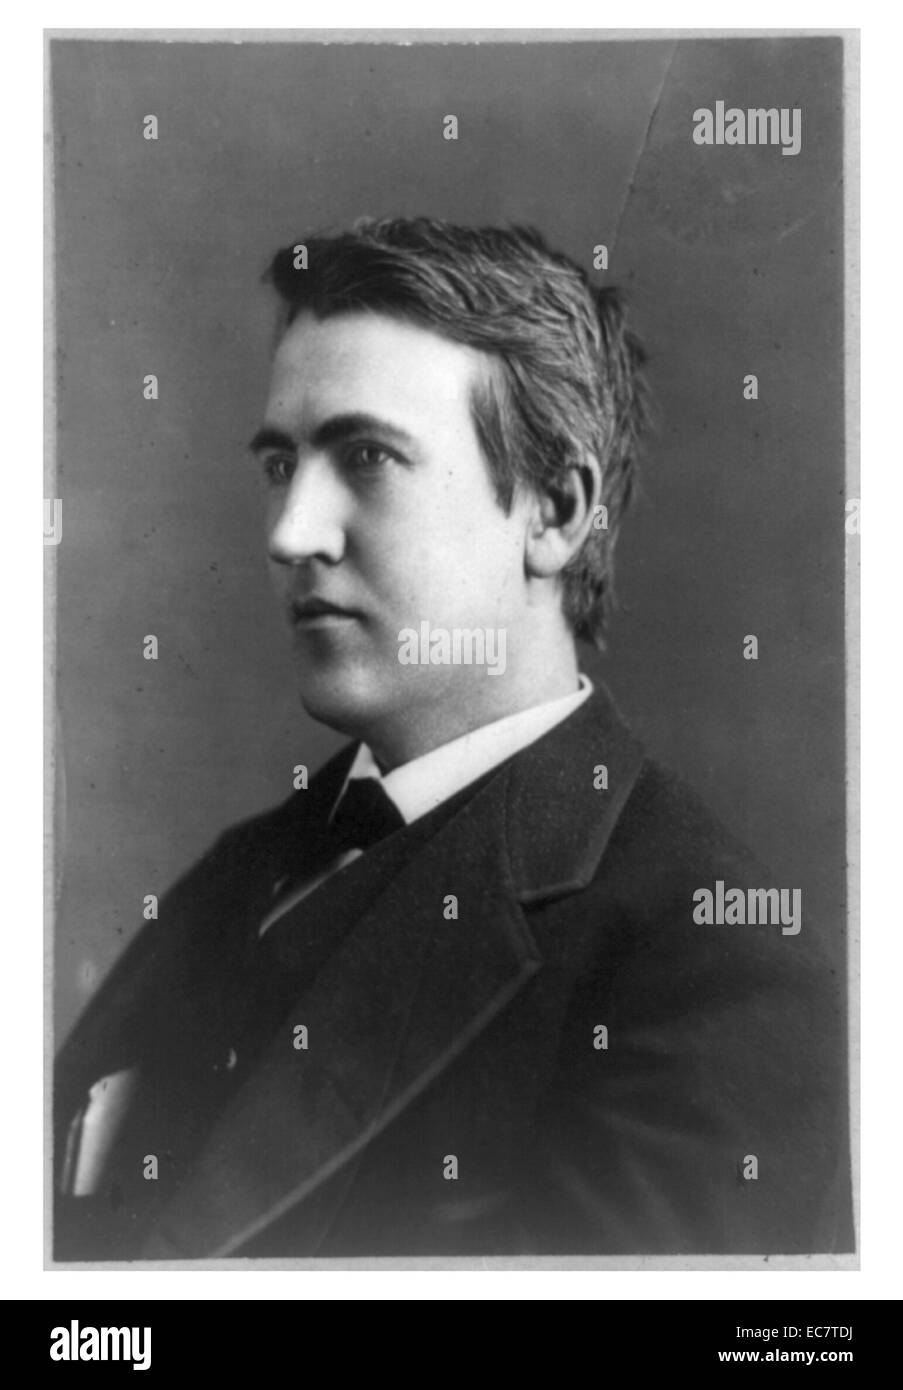 Thomas Alva Edison (February 11, 1847 – October 18, 1931) was an American inventor and businessman. Well known for the invention of the light blub. Stock Photo